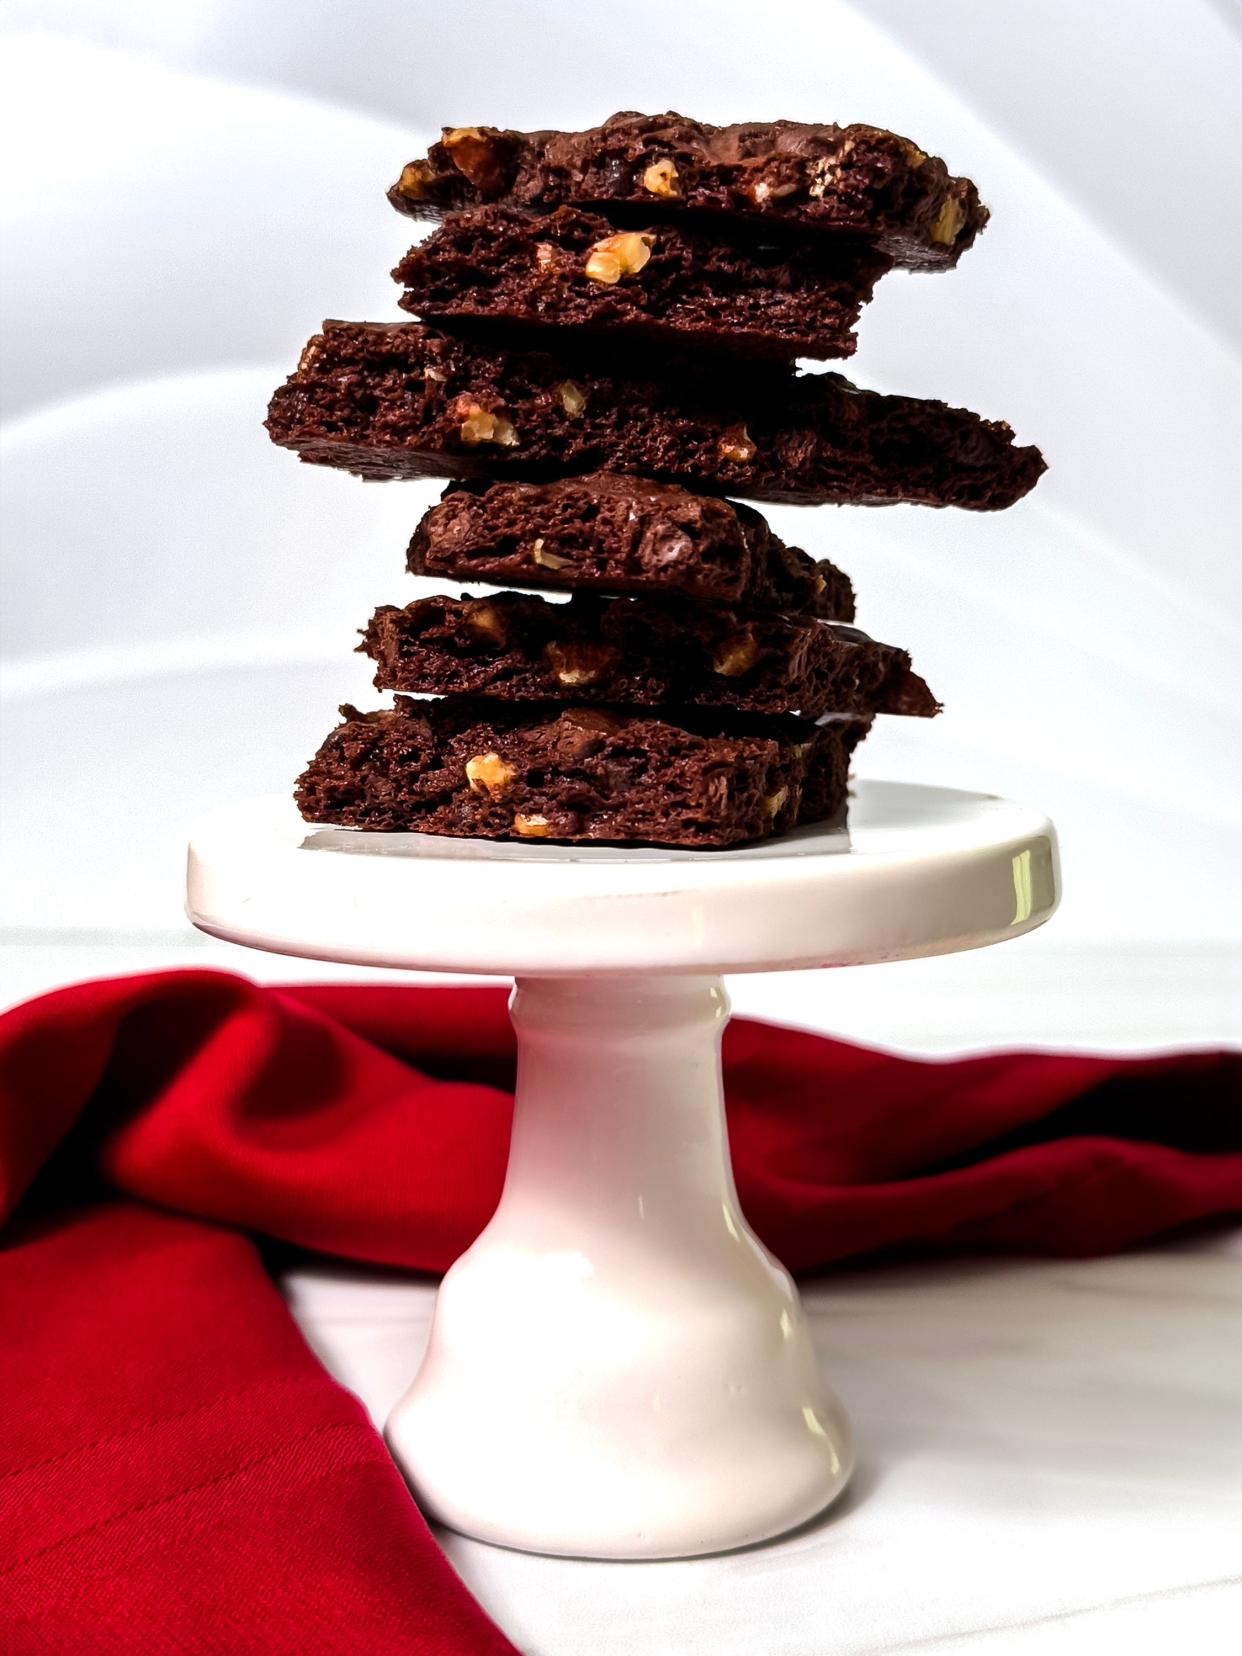 Unlike traditional brownies, which are dense and fudgy, brownie brittle is baked to a delicate crispness.